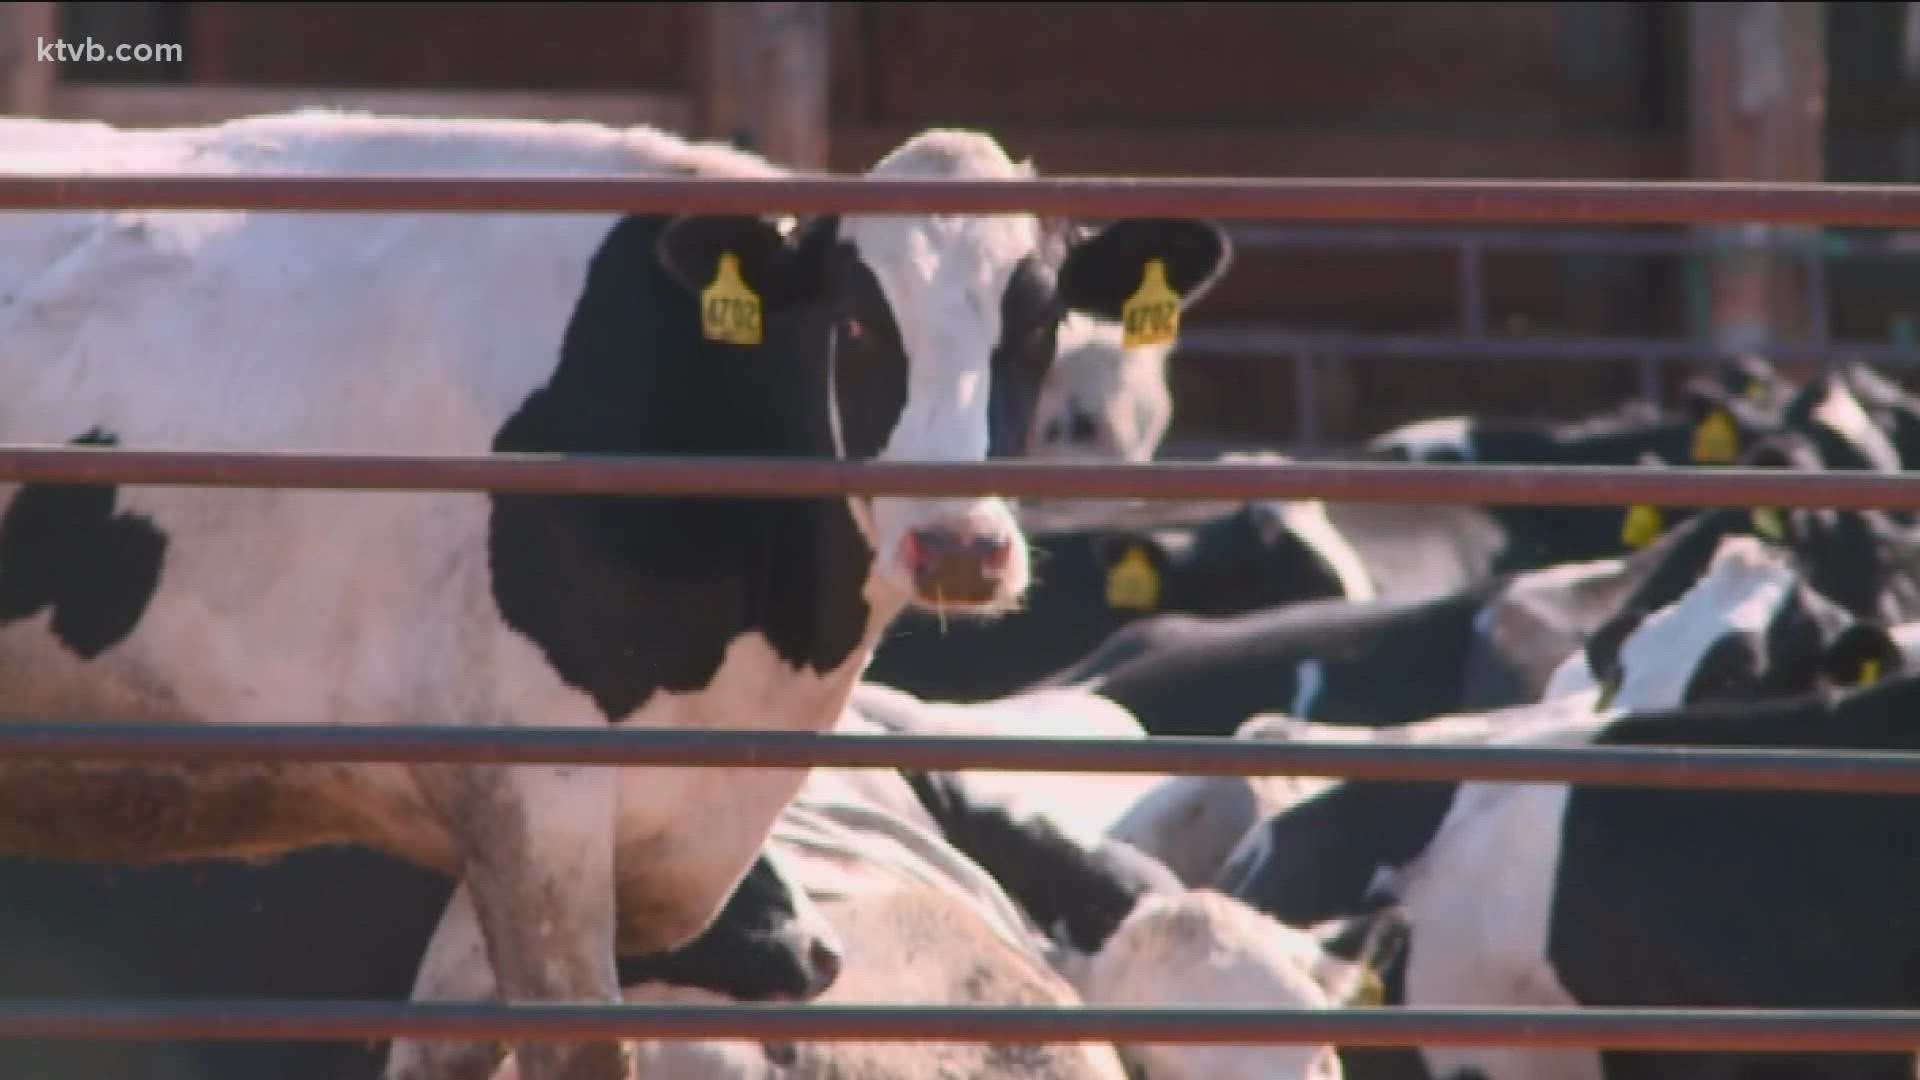 KTVB spoke to Idaho Dairymen's Association CEO Rick Naerebout, who called on Idaho's congressional delegation to support the Farm Workforce Modernization Act.